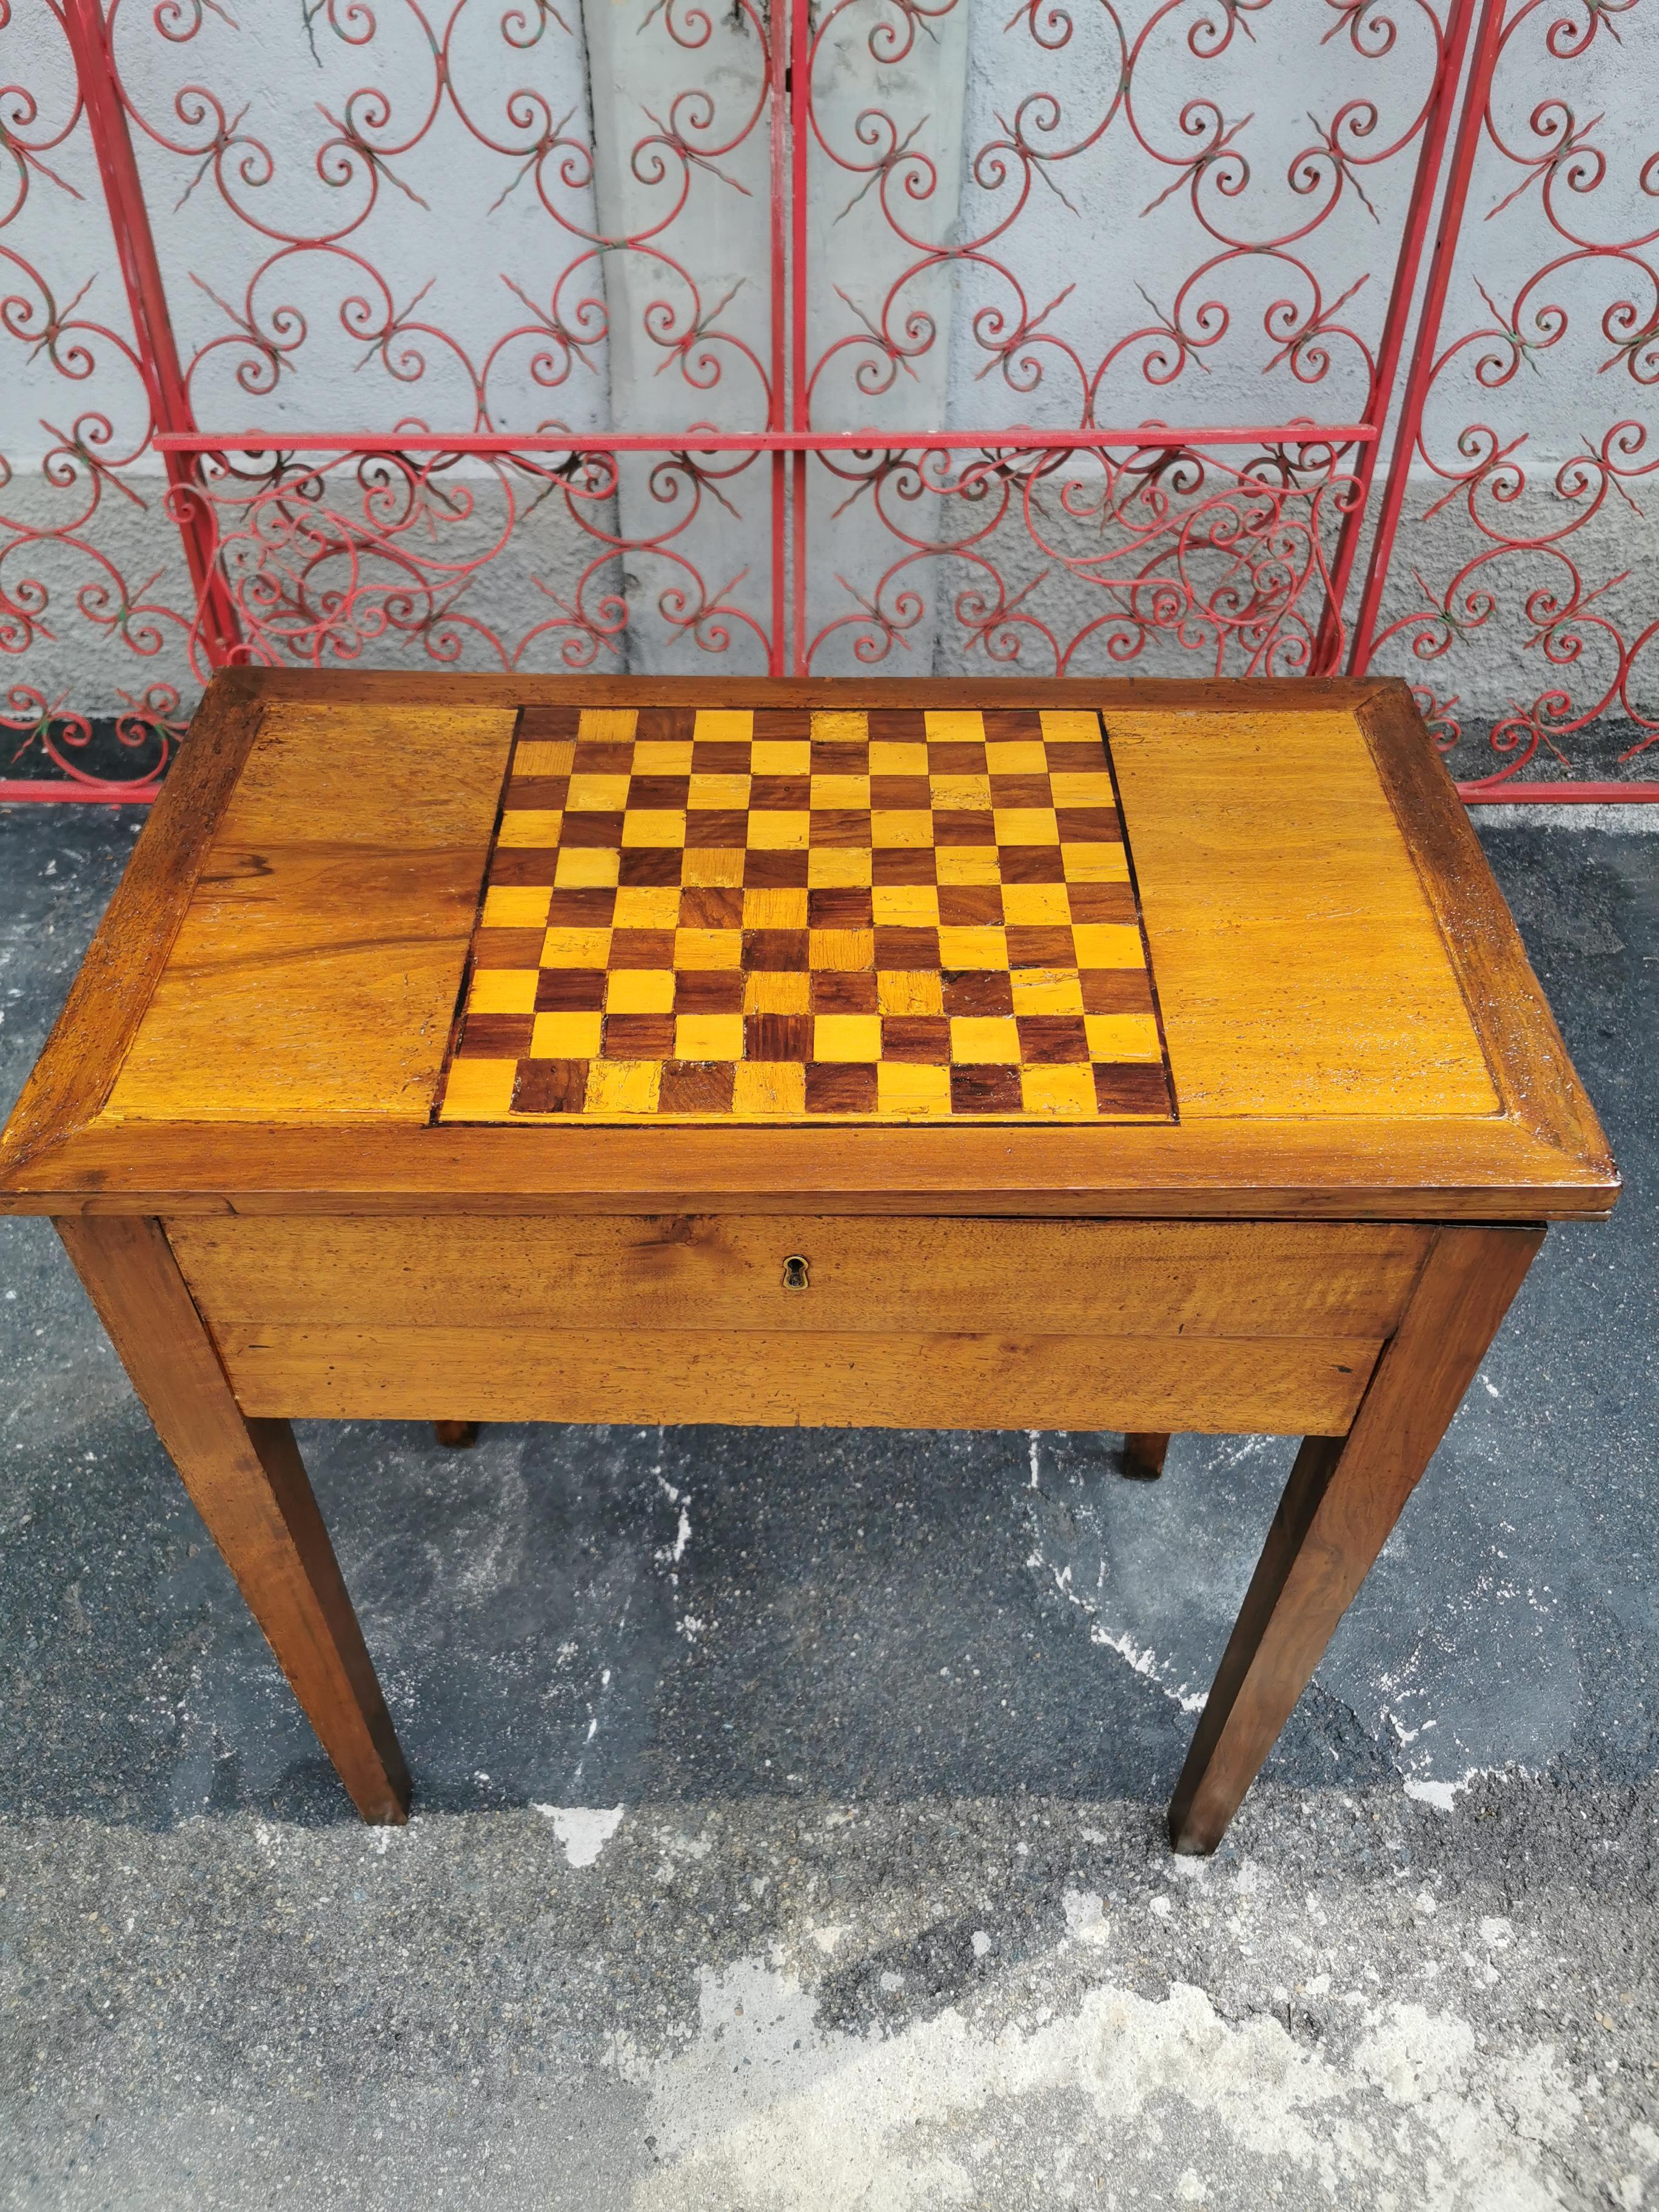 18th Century Louis XVI Marquetry game table circa 1790 France.
The table is very functional because it can be used as writing table or a side table.
It has a drawer and also a space with a make up mirror inside.
This item is transaction period of